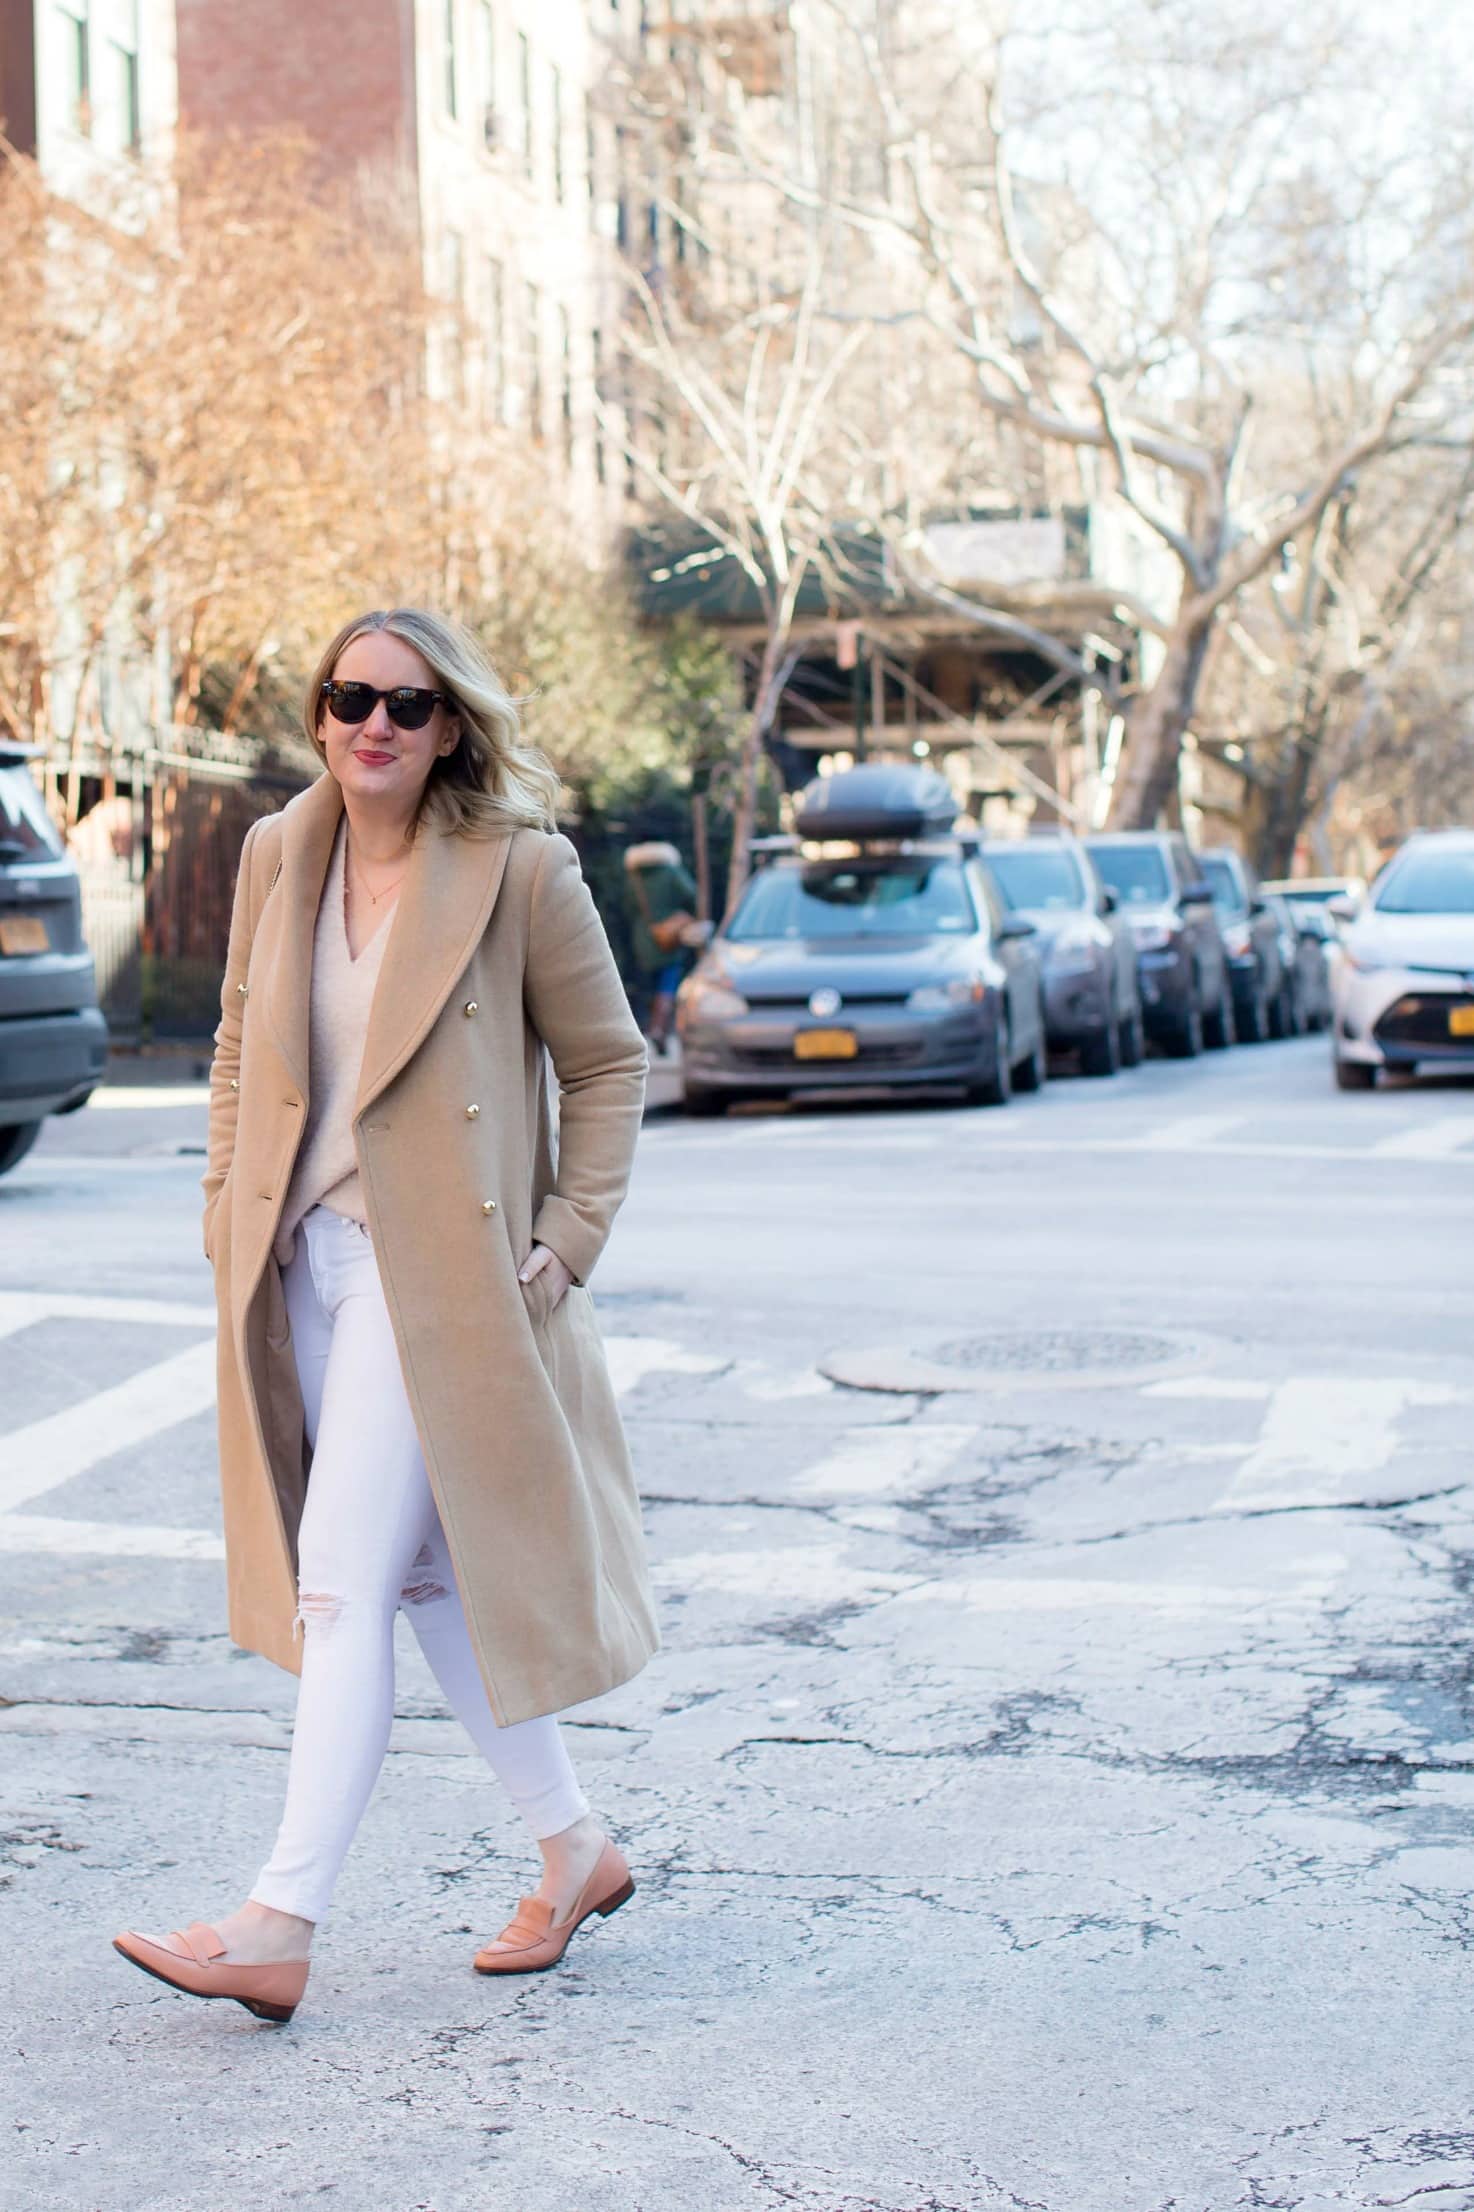 Styling White Jeans in Winter I wit & whimsy